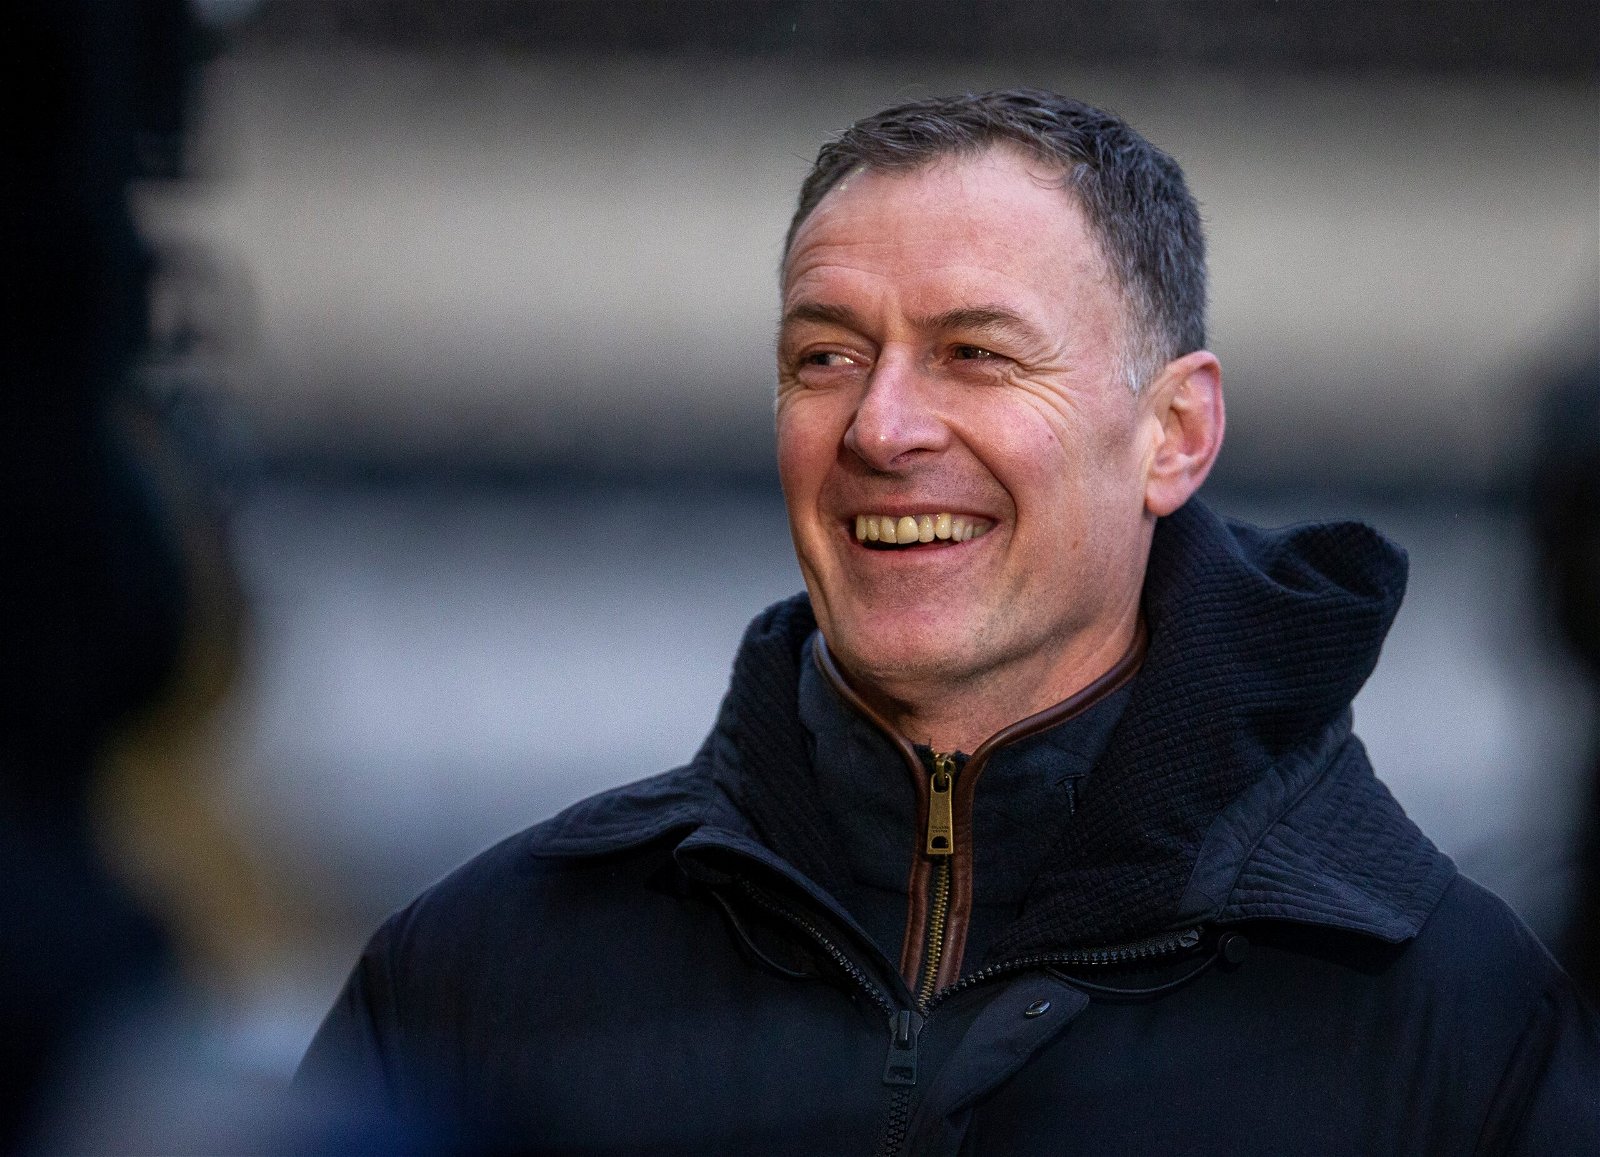 Just A Fabulous Talent" - Chris Sutton In High Praise For Celtic Star |  Latest Celtic News